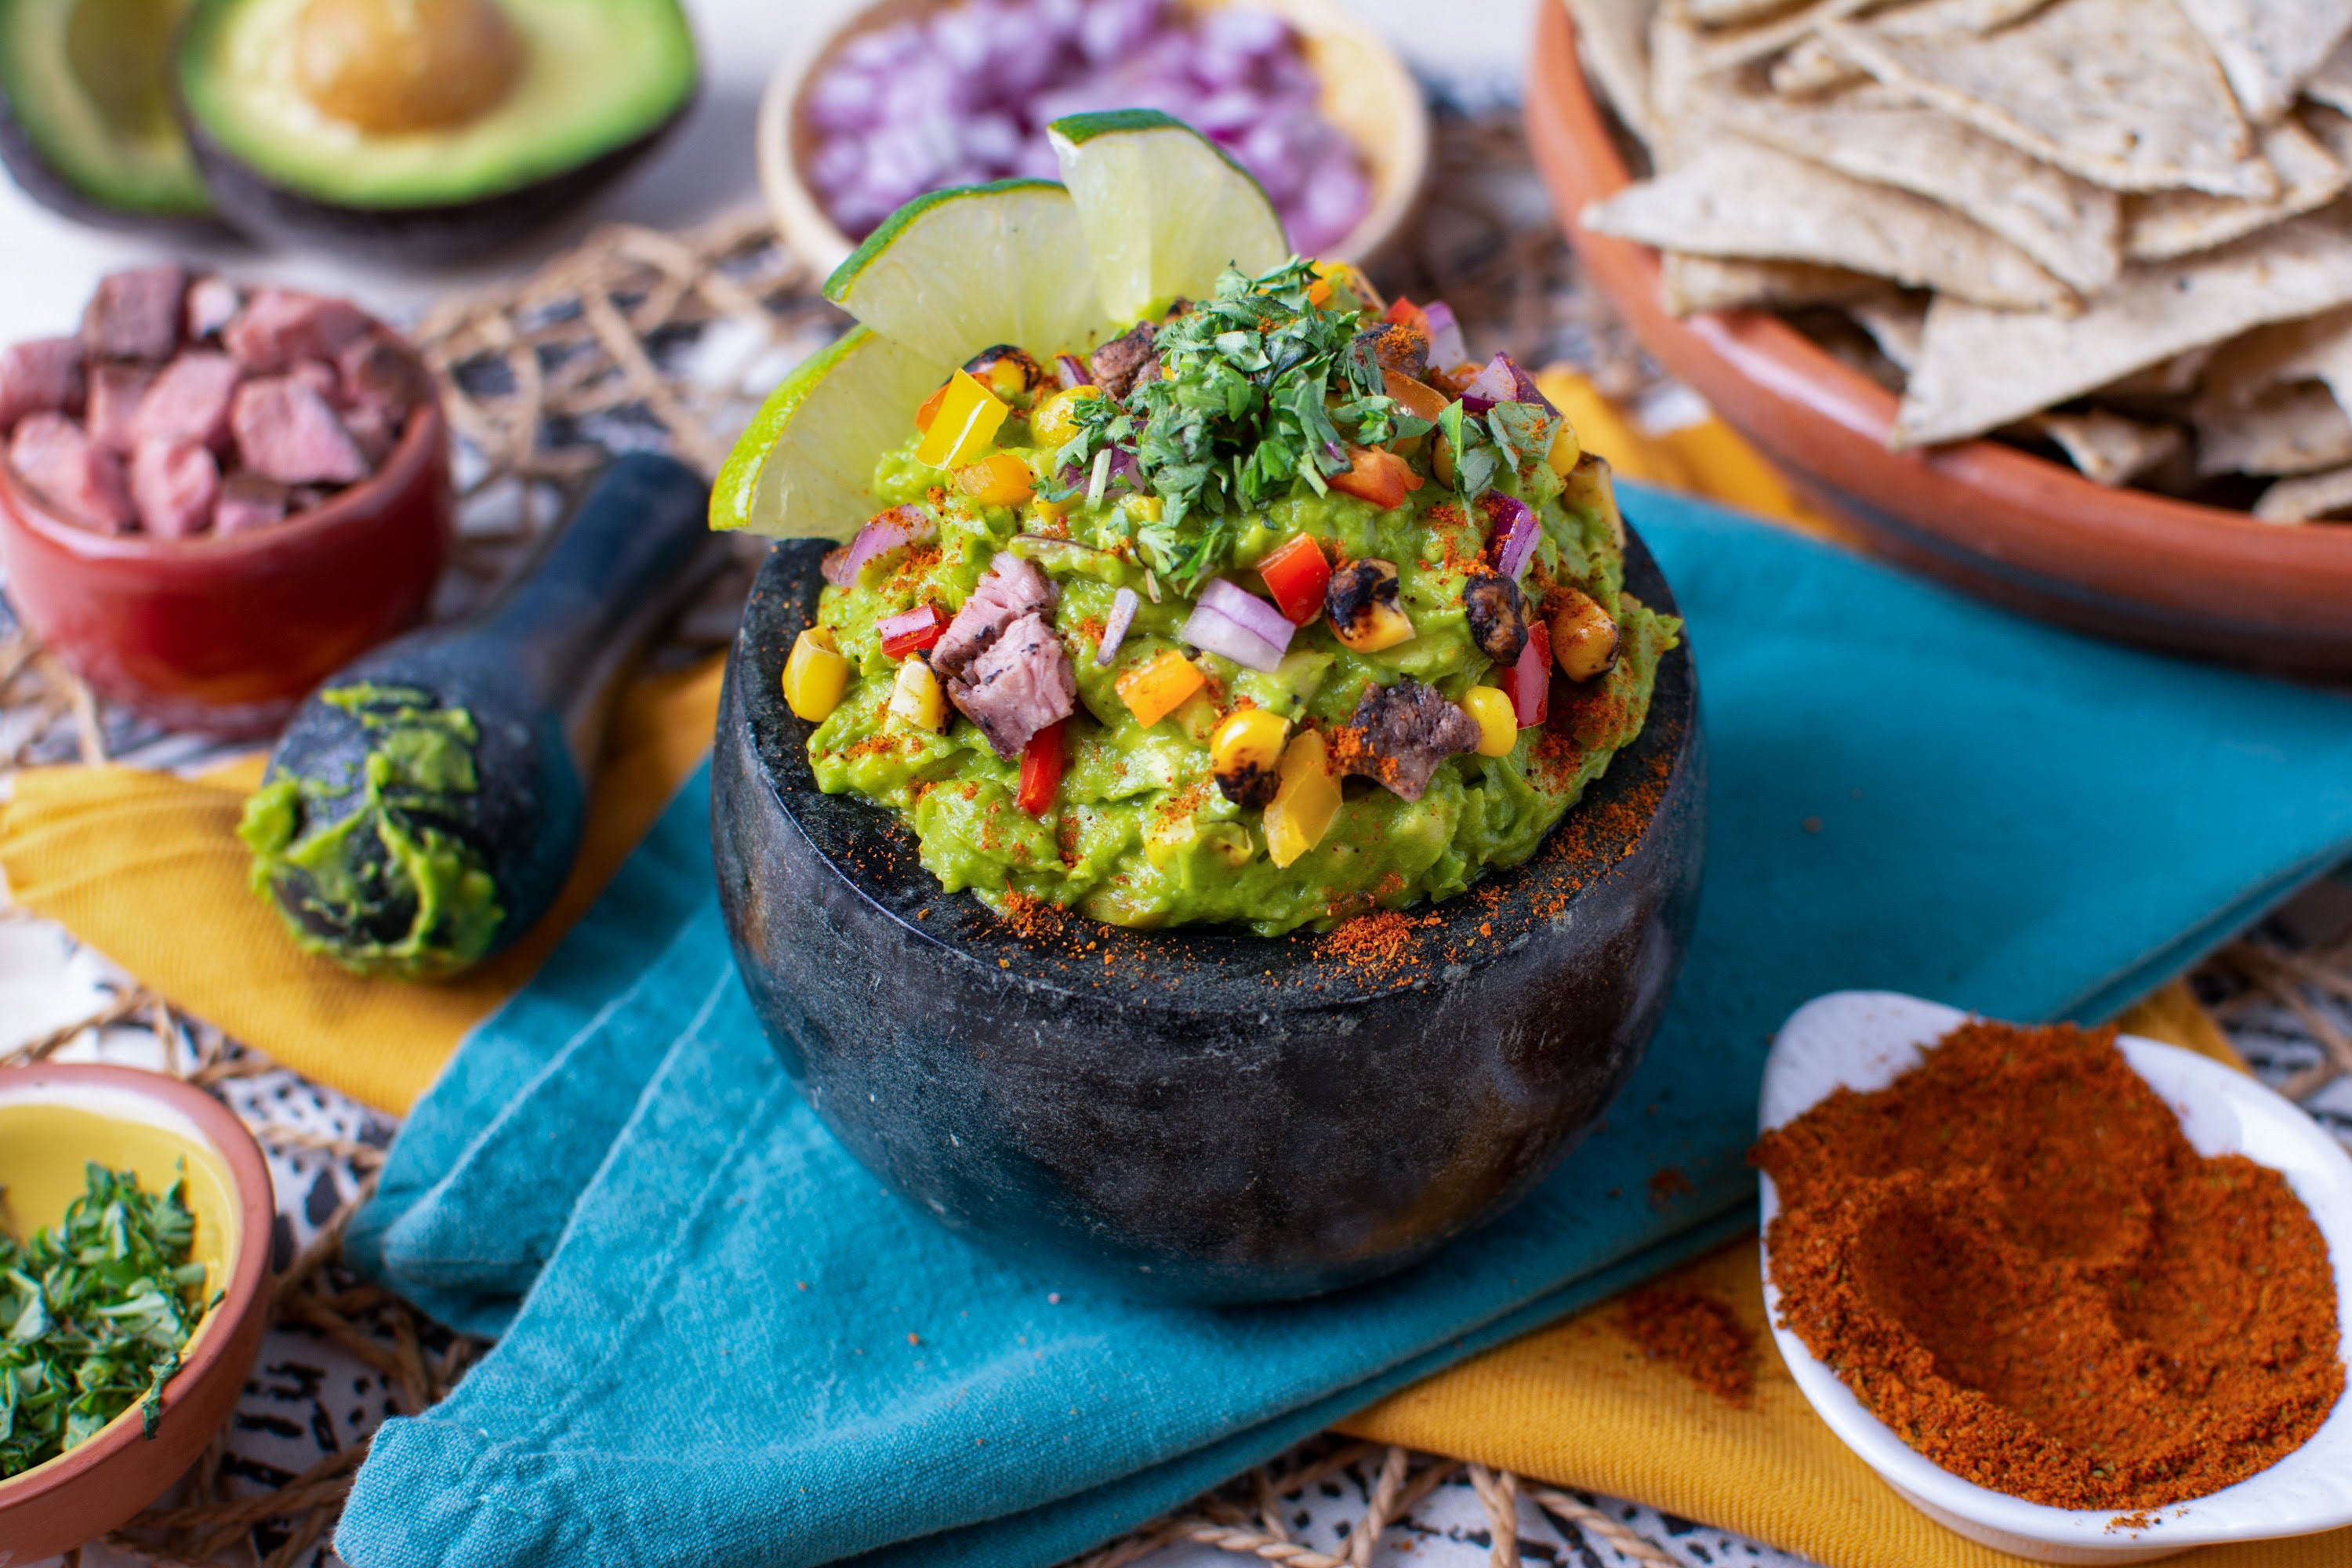 Guacamole in molcajete with assorted toppings in bowls around it